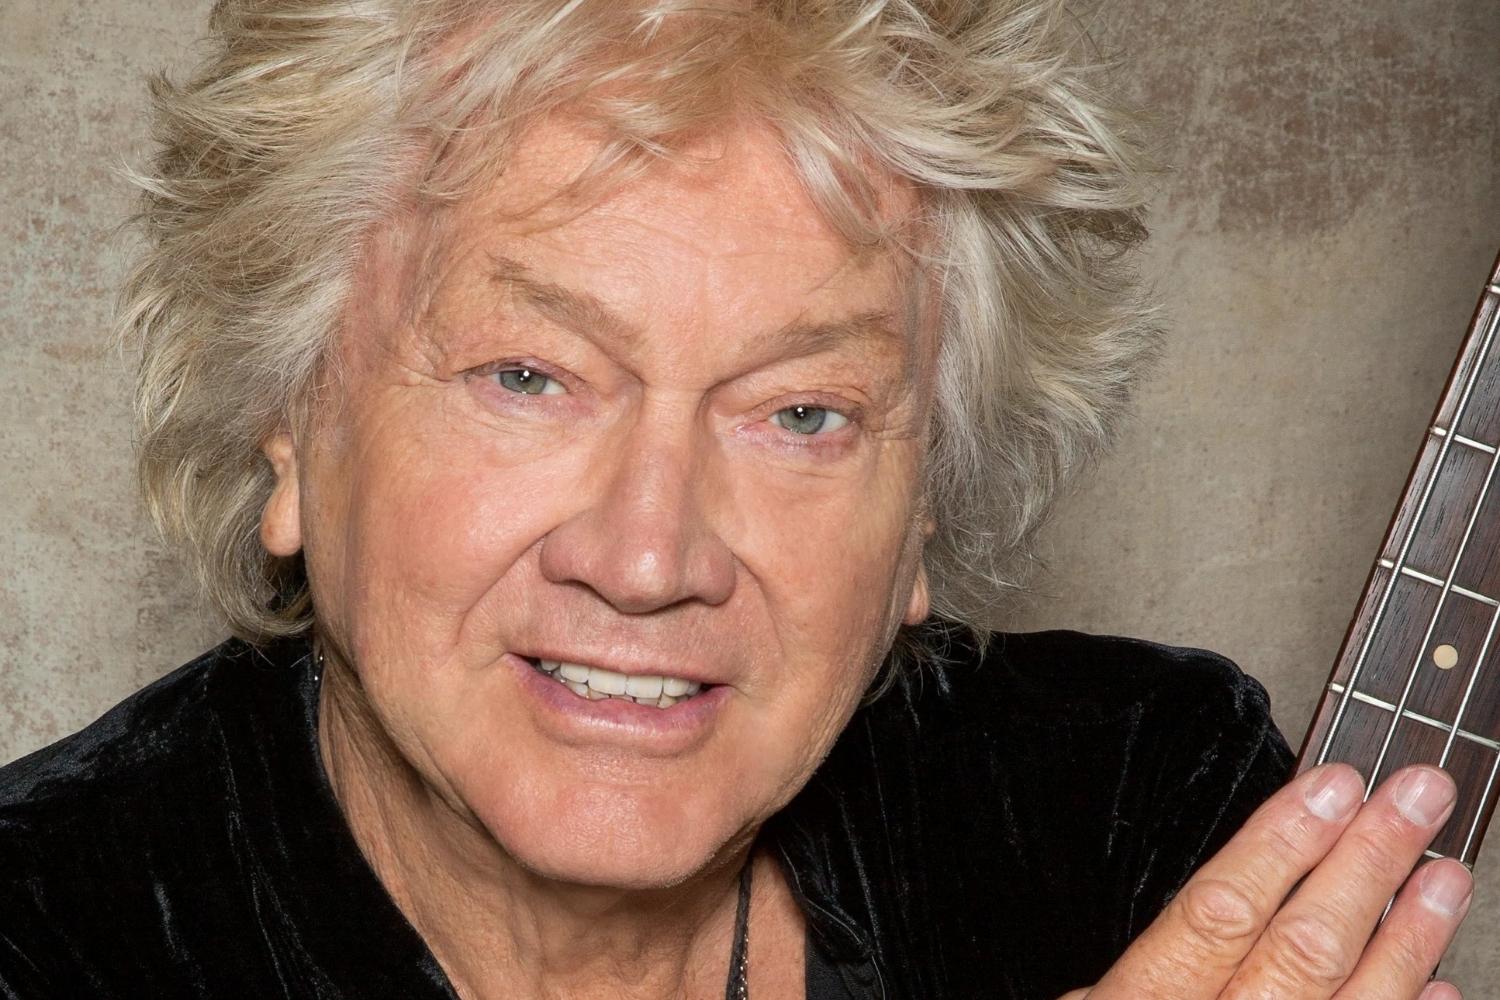 18-captivating-facts-about-john-lodge